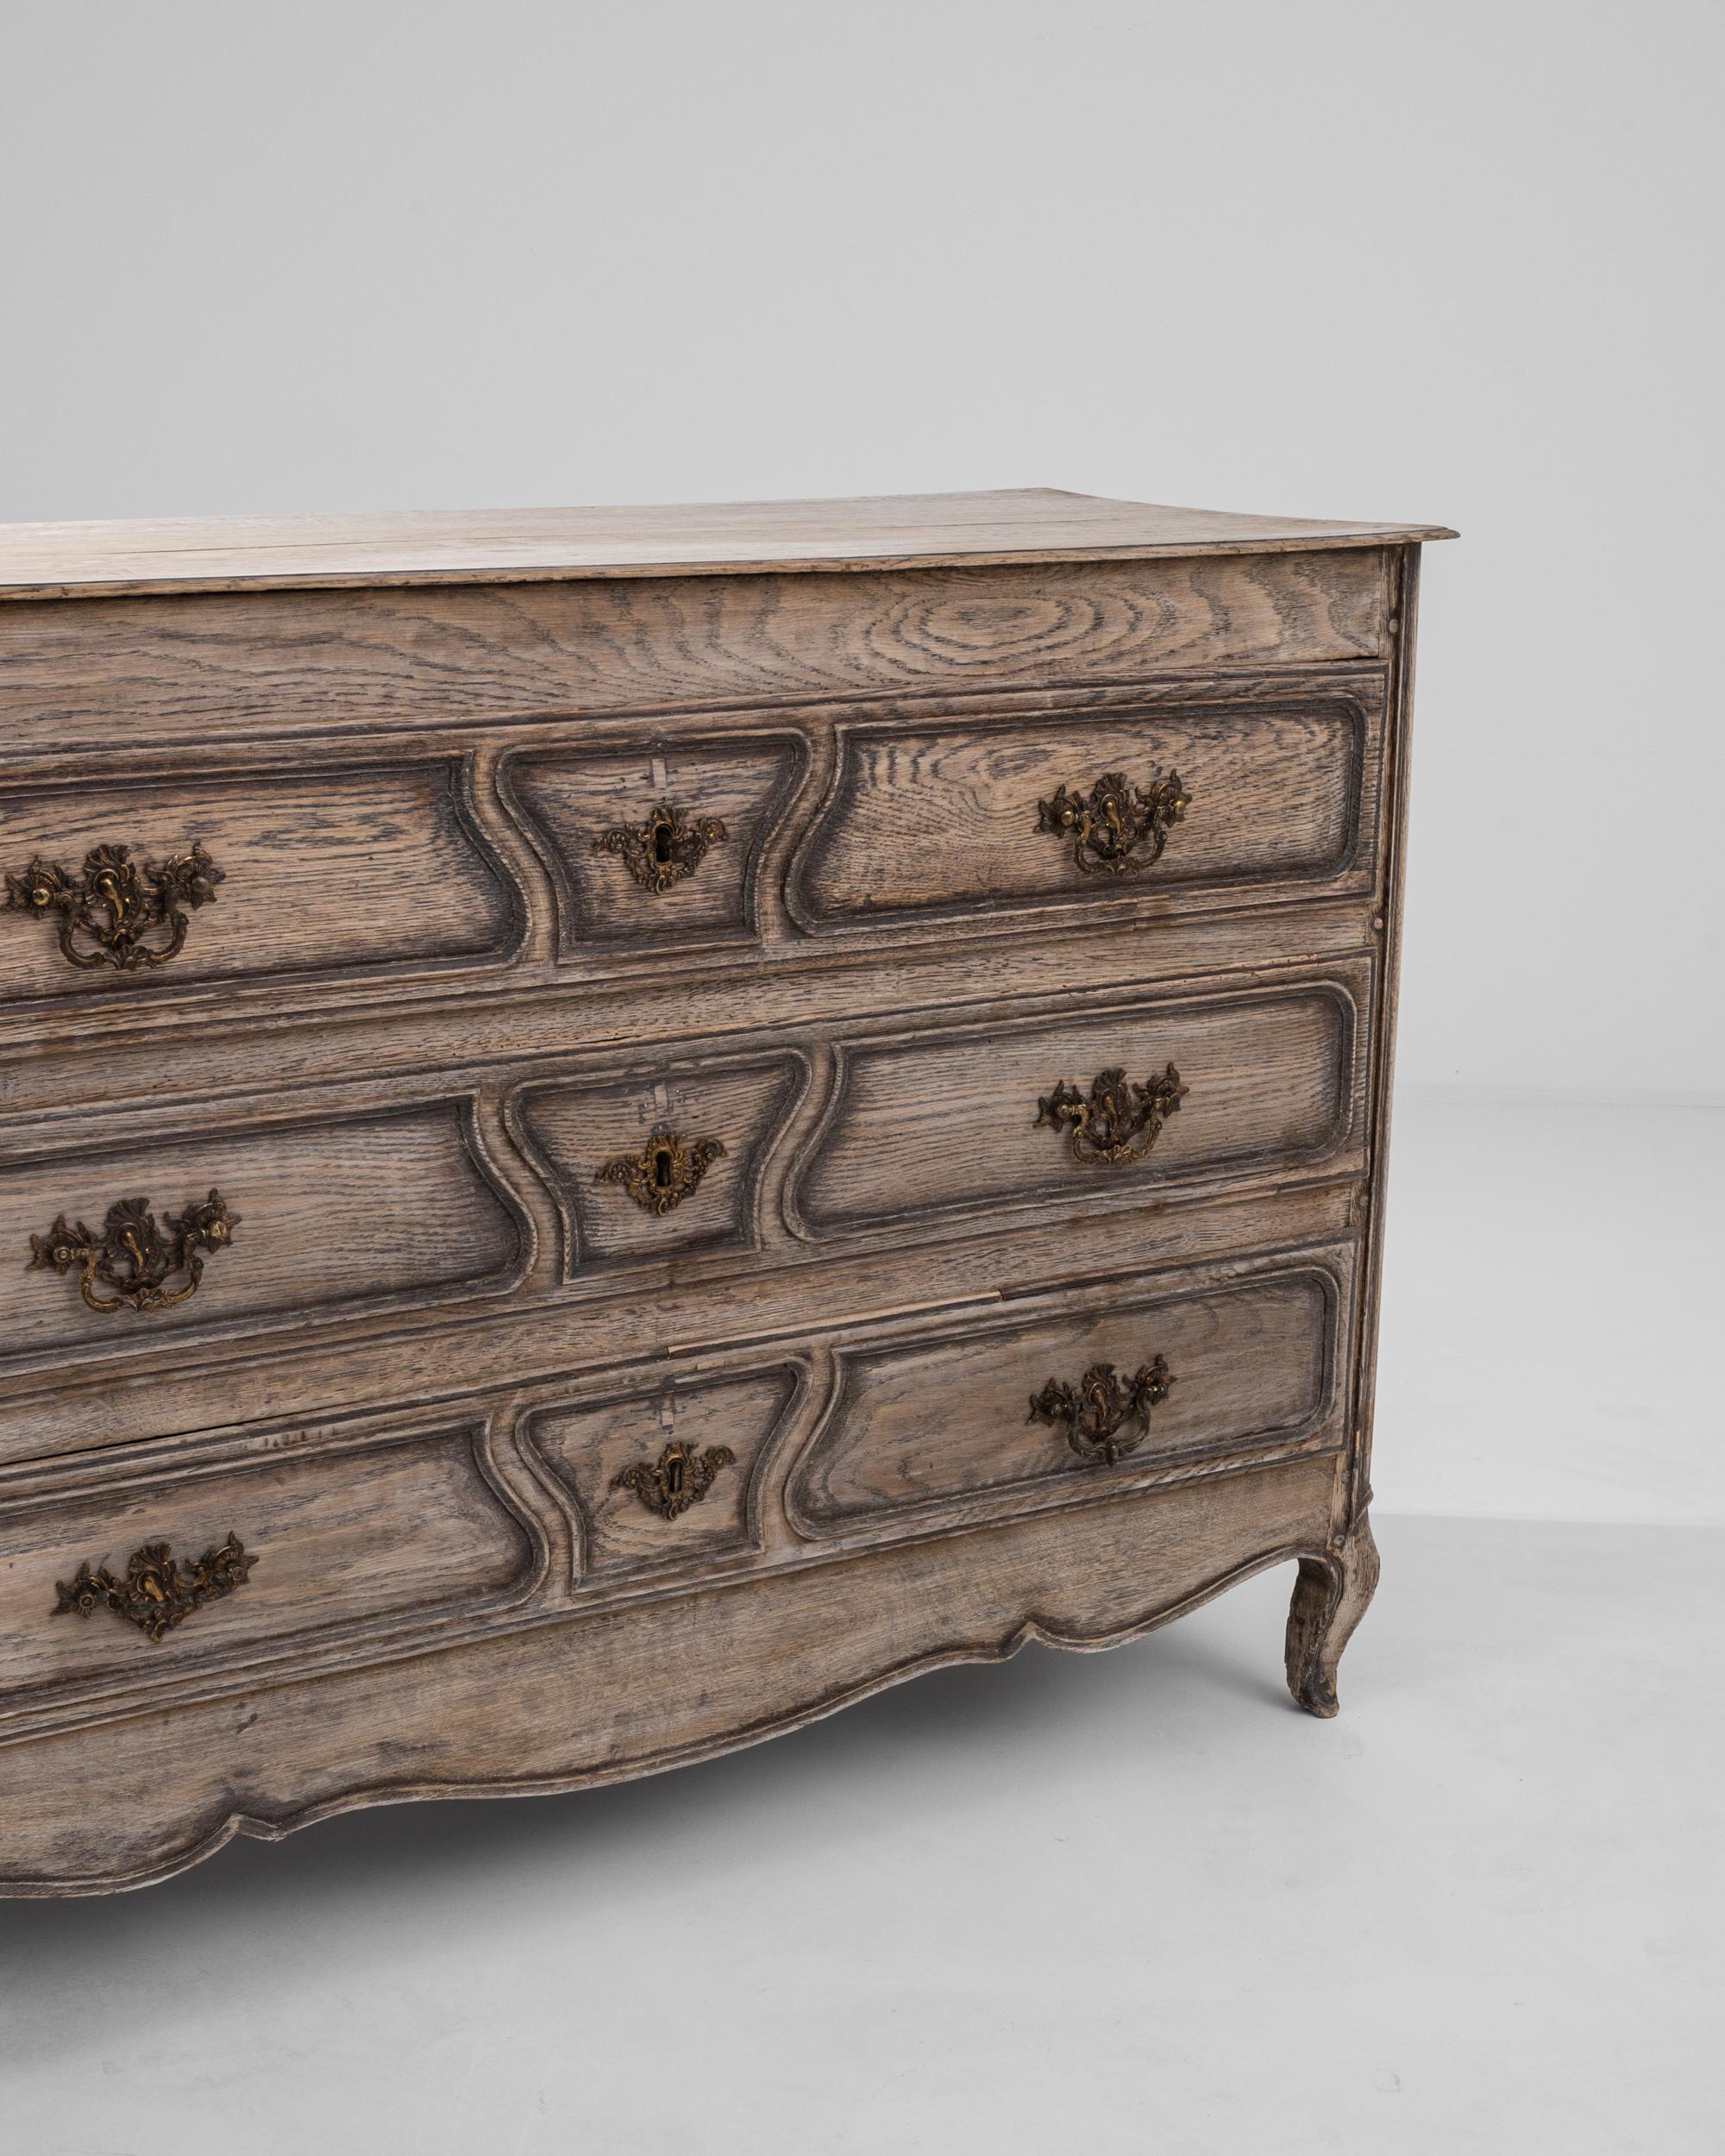 Embark on a journey of refinement with this 19th Century French Bleached Oak Chest of Drawers. Exuding timeless elegance, this piece features three spacious sliding drawers adorned with intricate engraved patterns. The scalloped apron and front